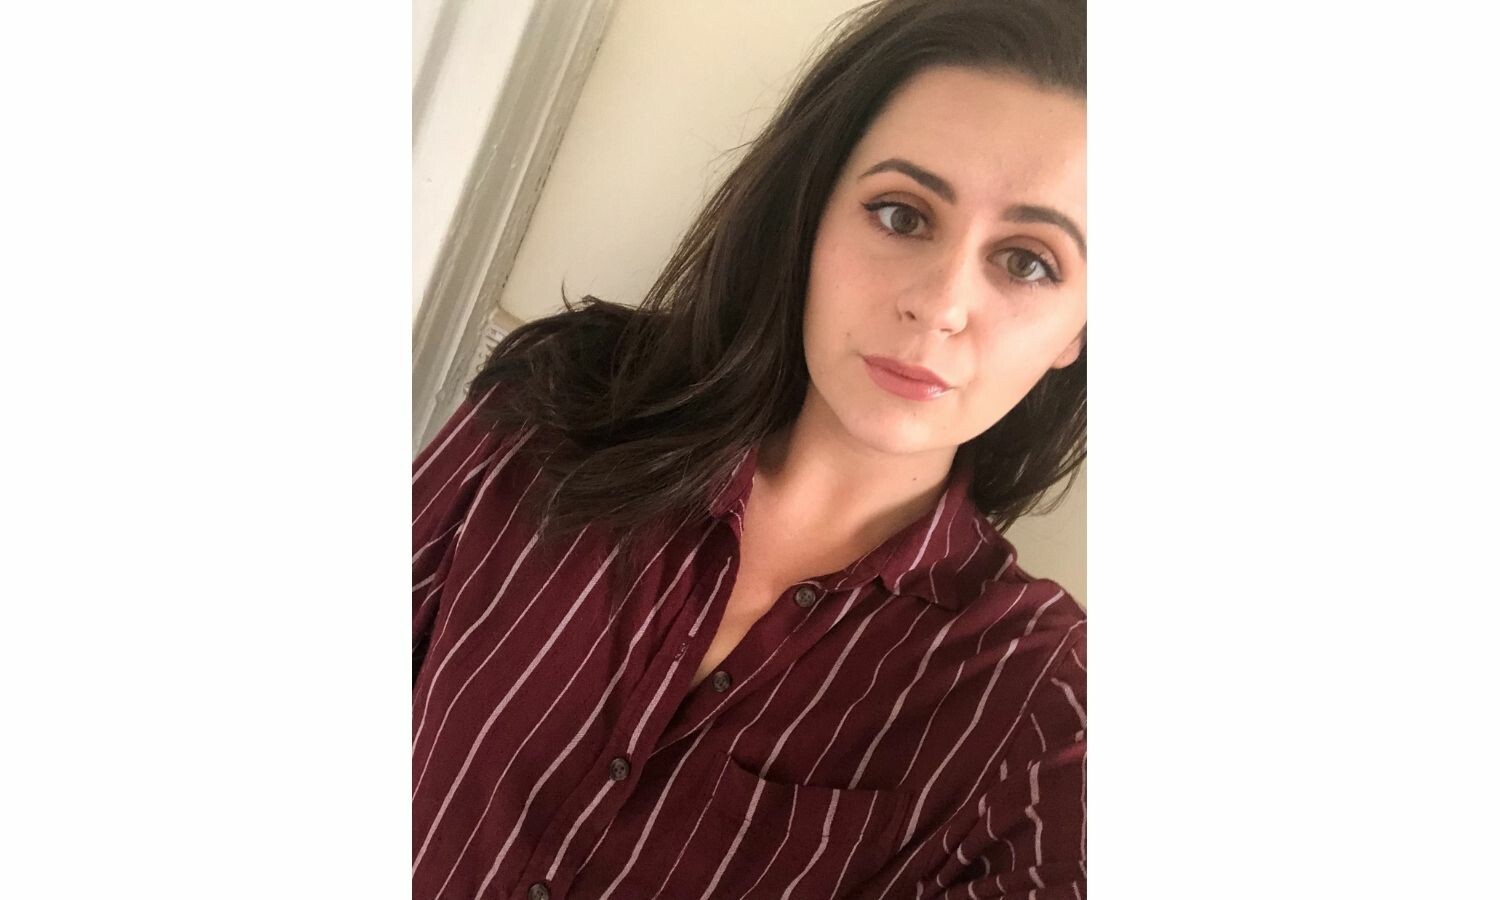 A selfie of Ashley Malafronte, wearing a red shirt with white stripes.